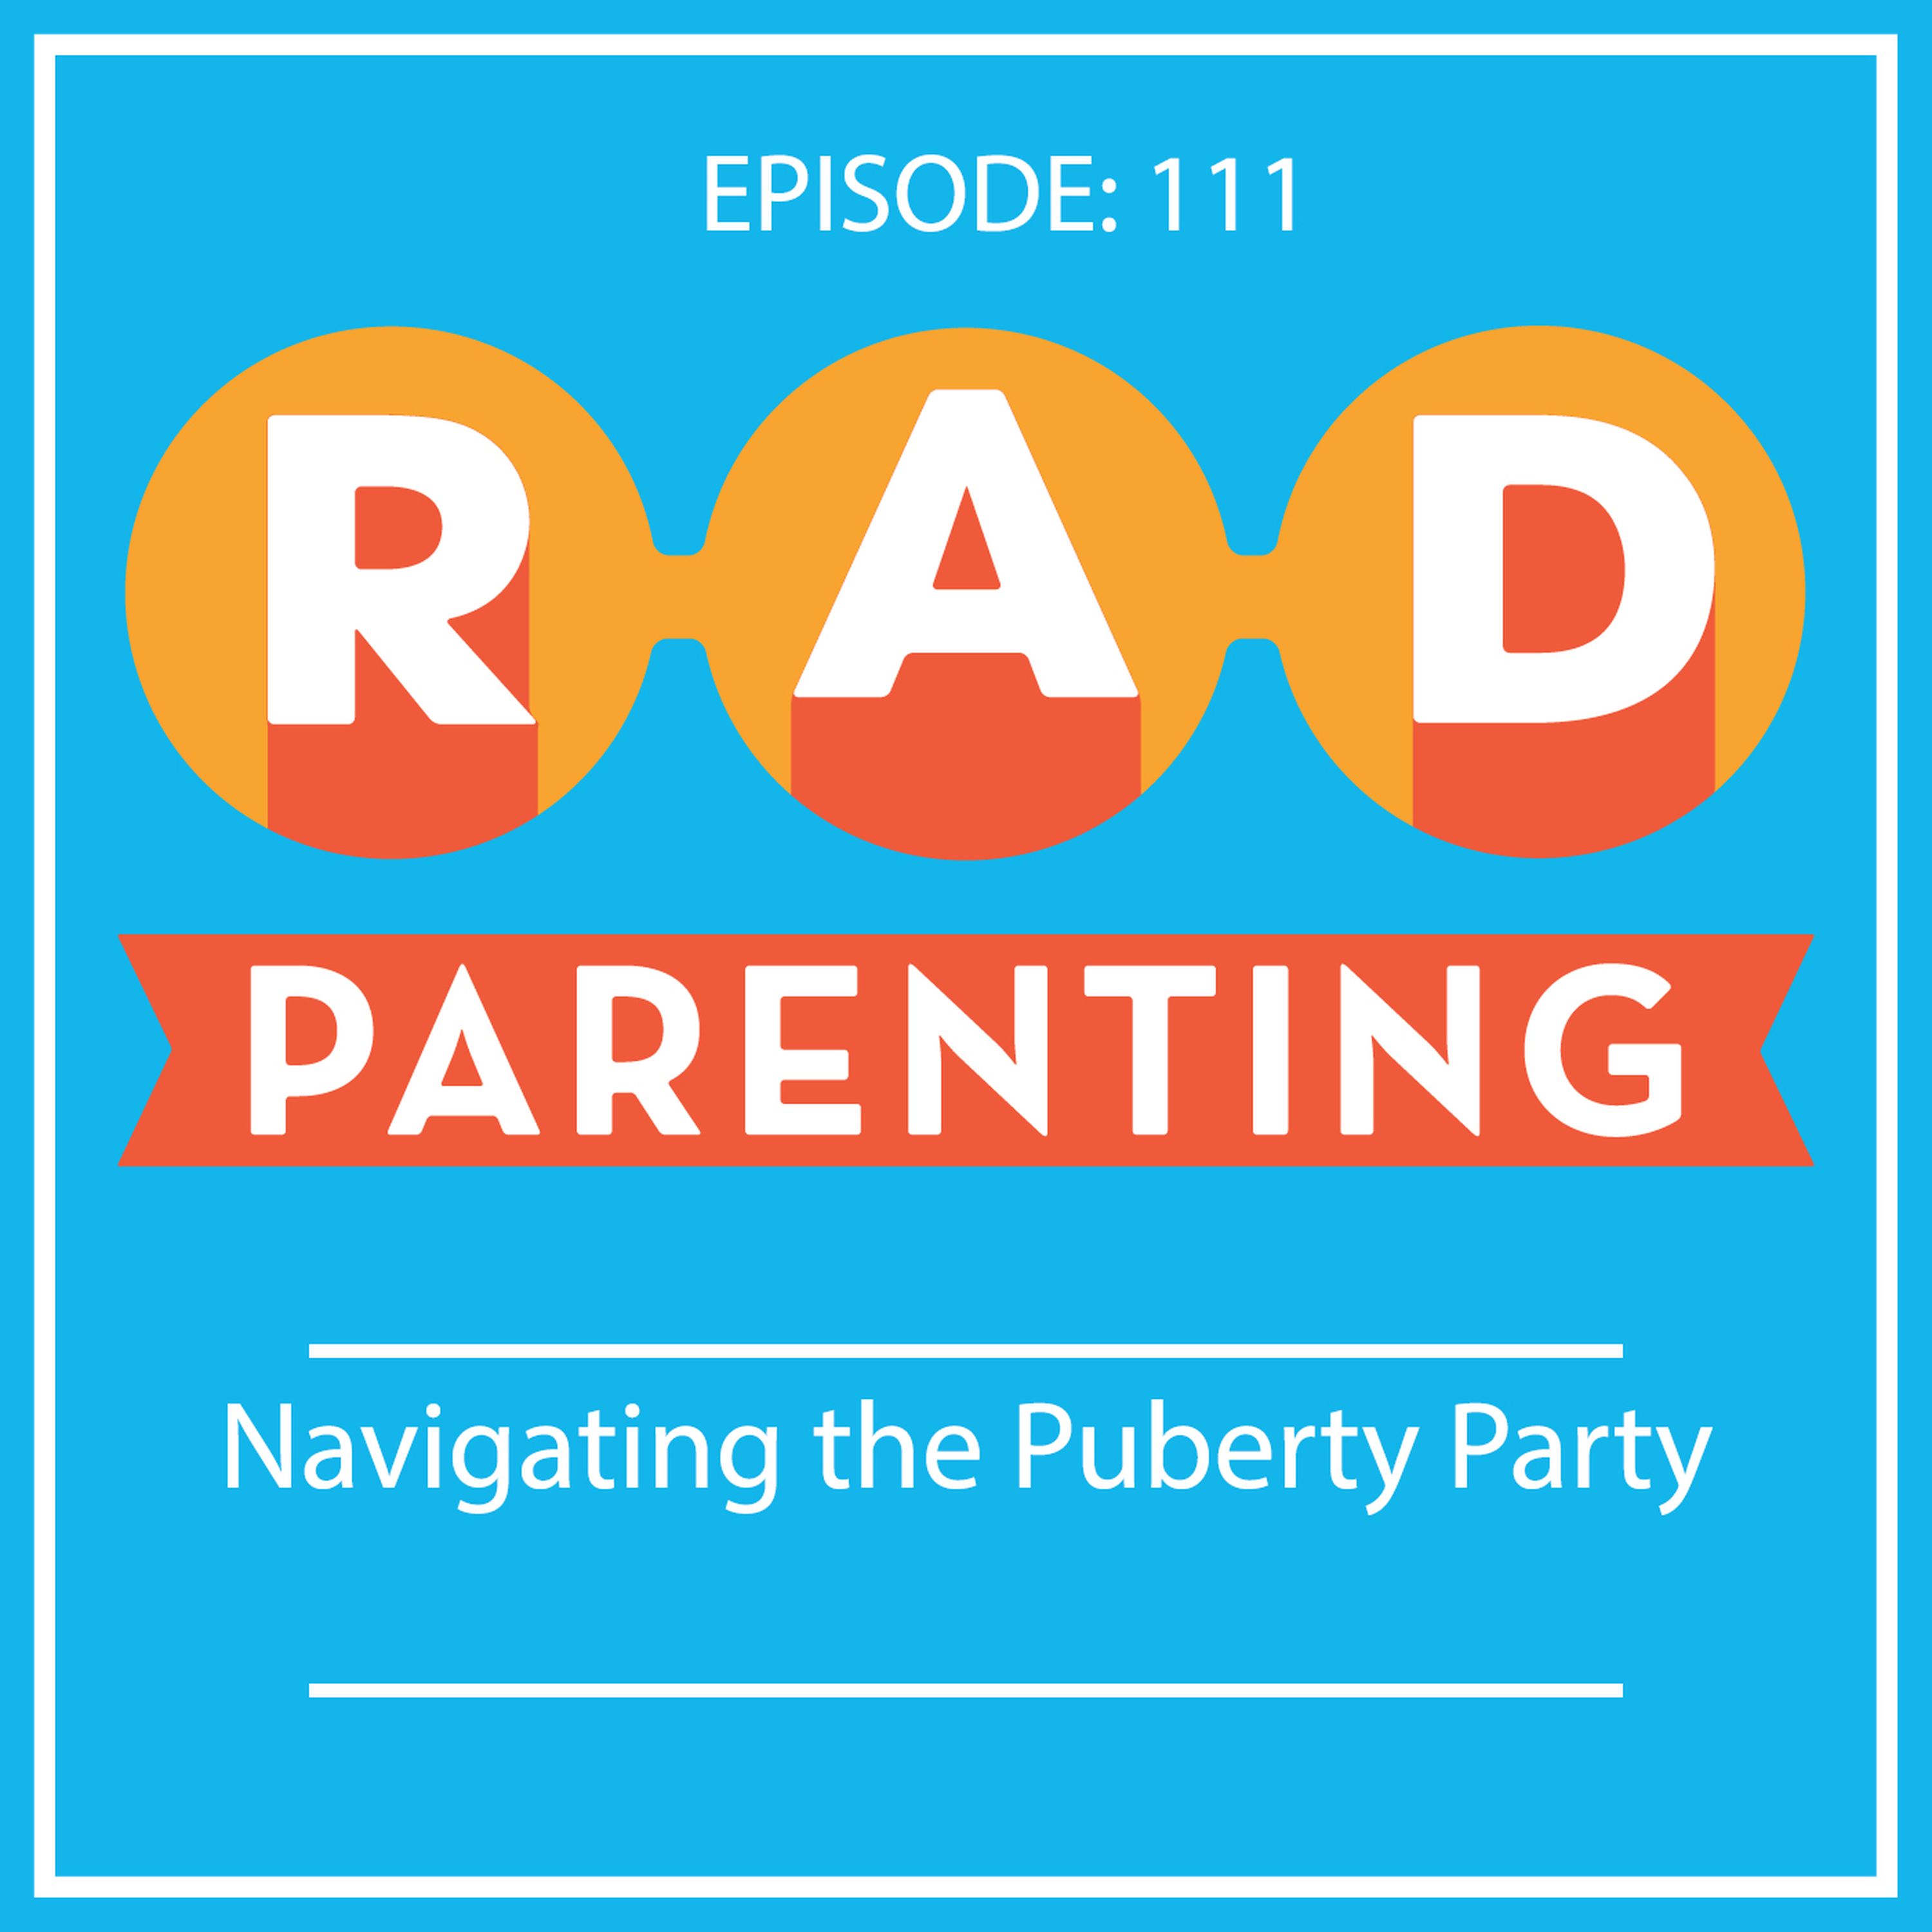 Navigating the Puberty Party